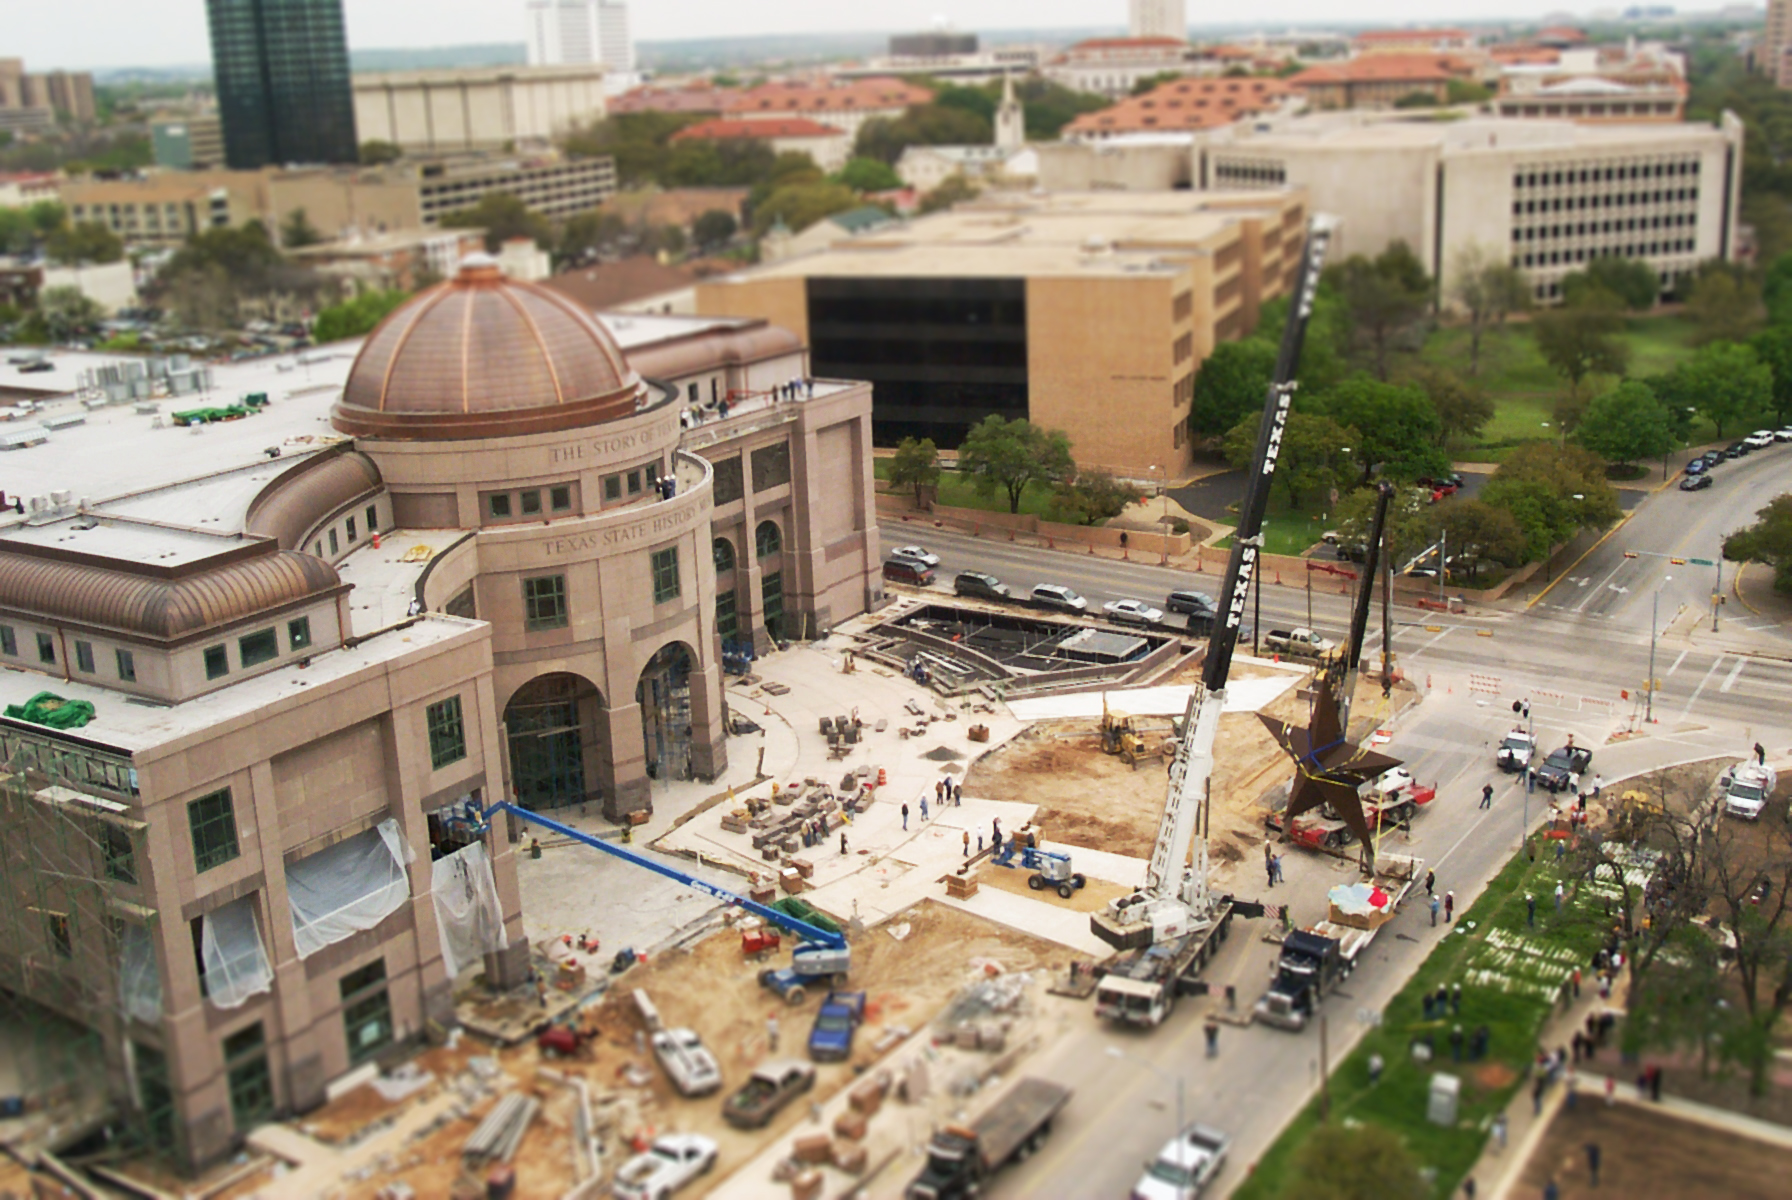 Construction of the Bullock Museum was completed in 2001 and it opened in April of that year.